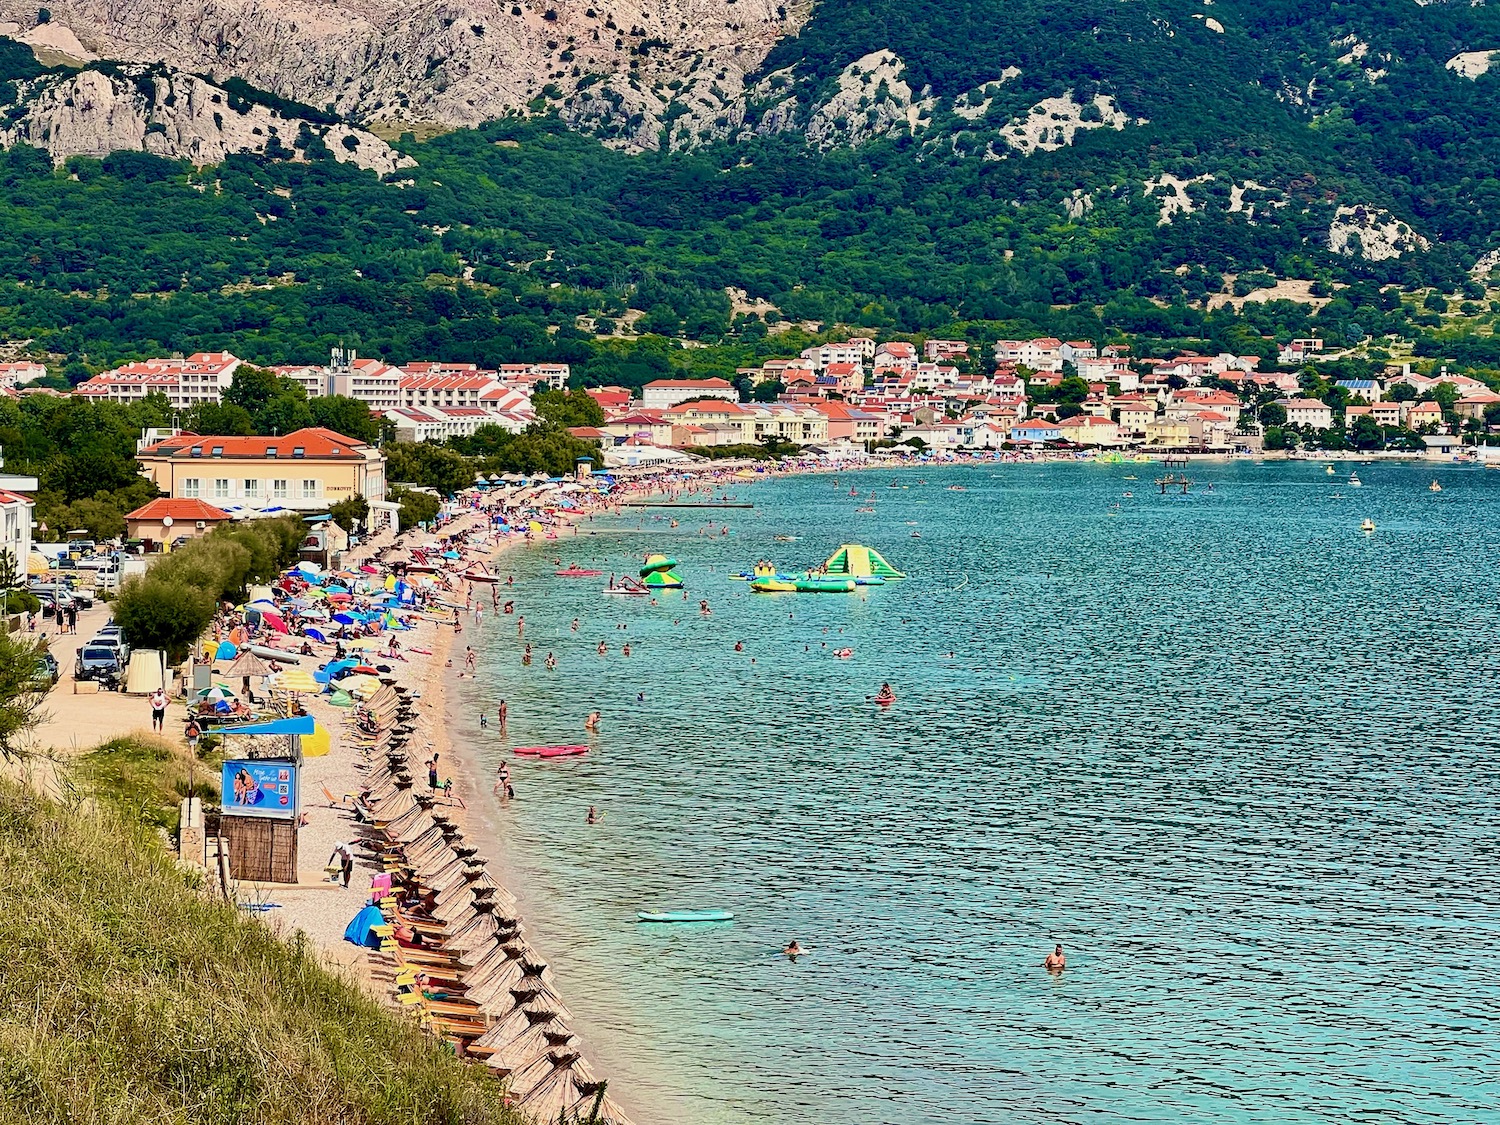 Baska is located on the southern tip of Krk between two mountain ranges. Unfortunately, the small town is completely overcrowded in the high season - but it's still worth a trip with a rental car. Photo: Sascha Tegtmeyer Travel report Krk tips experiences experience report